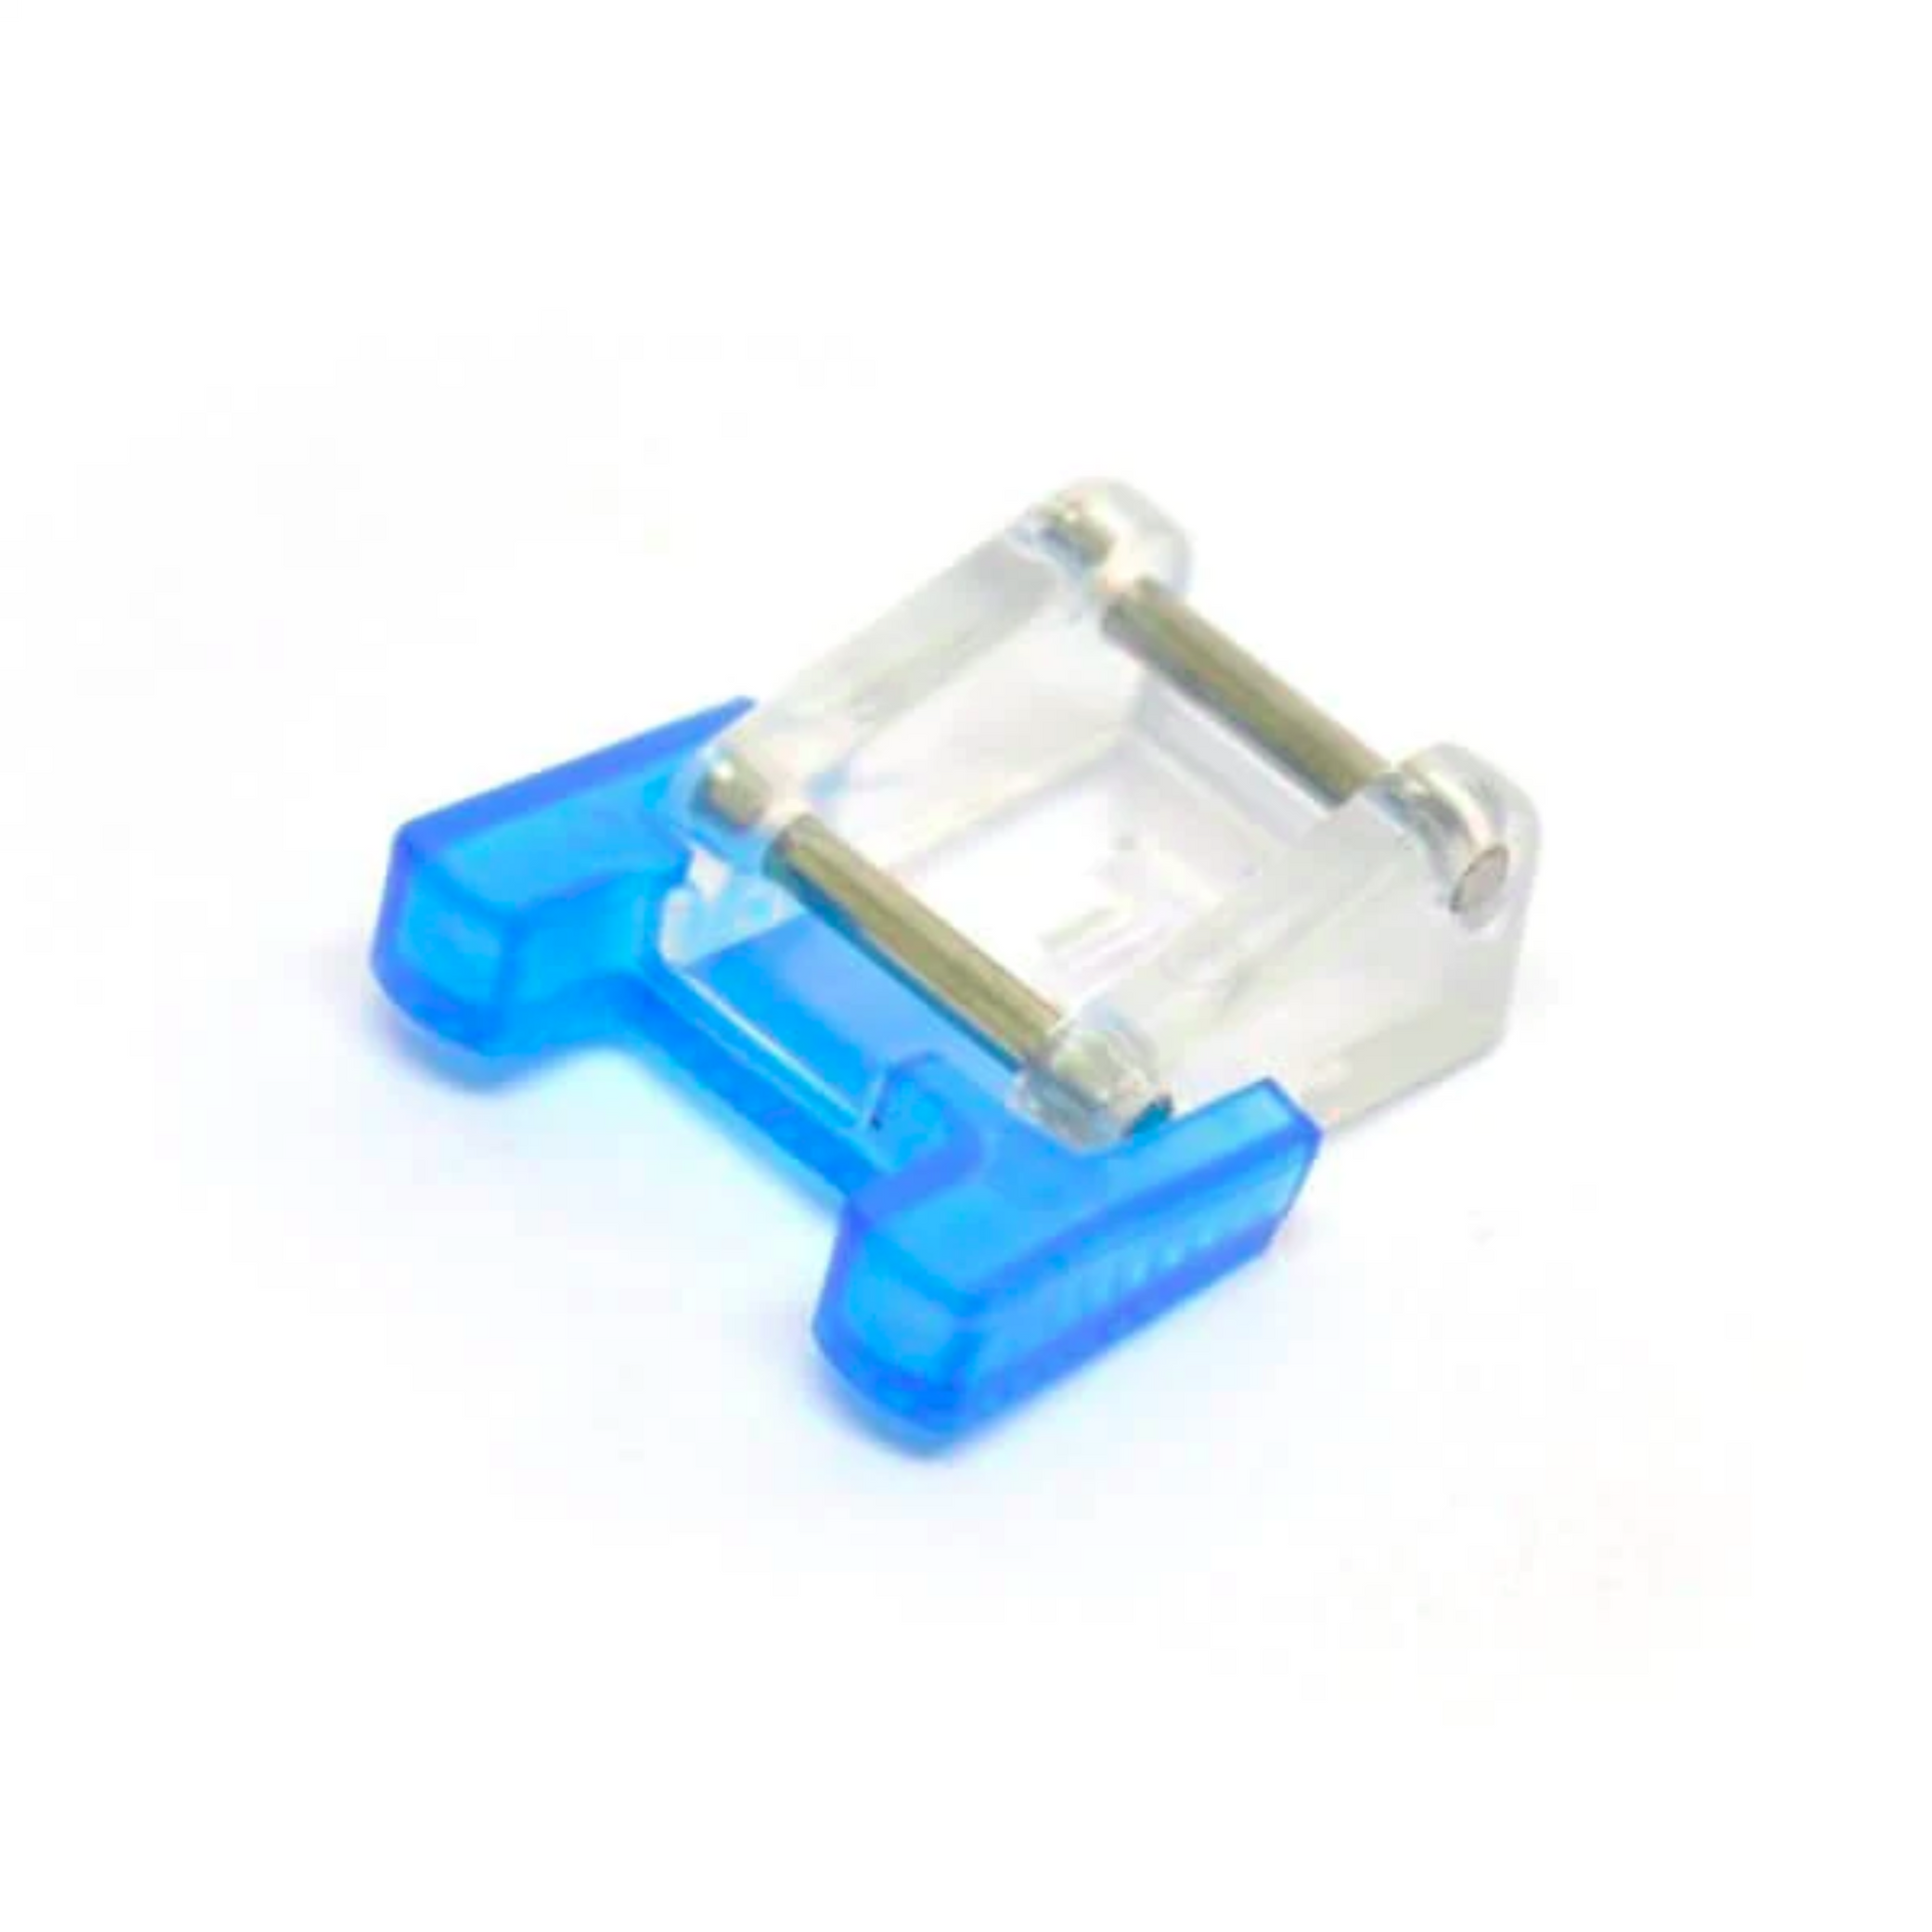 Janome button sewing foot - Sewing accessory - Multi color - Front view